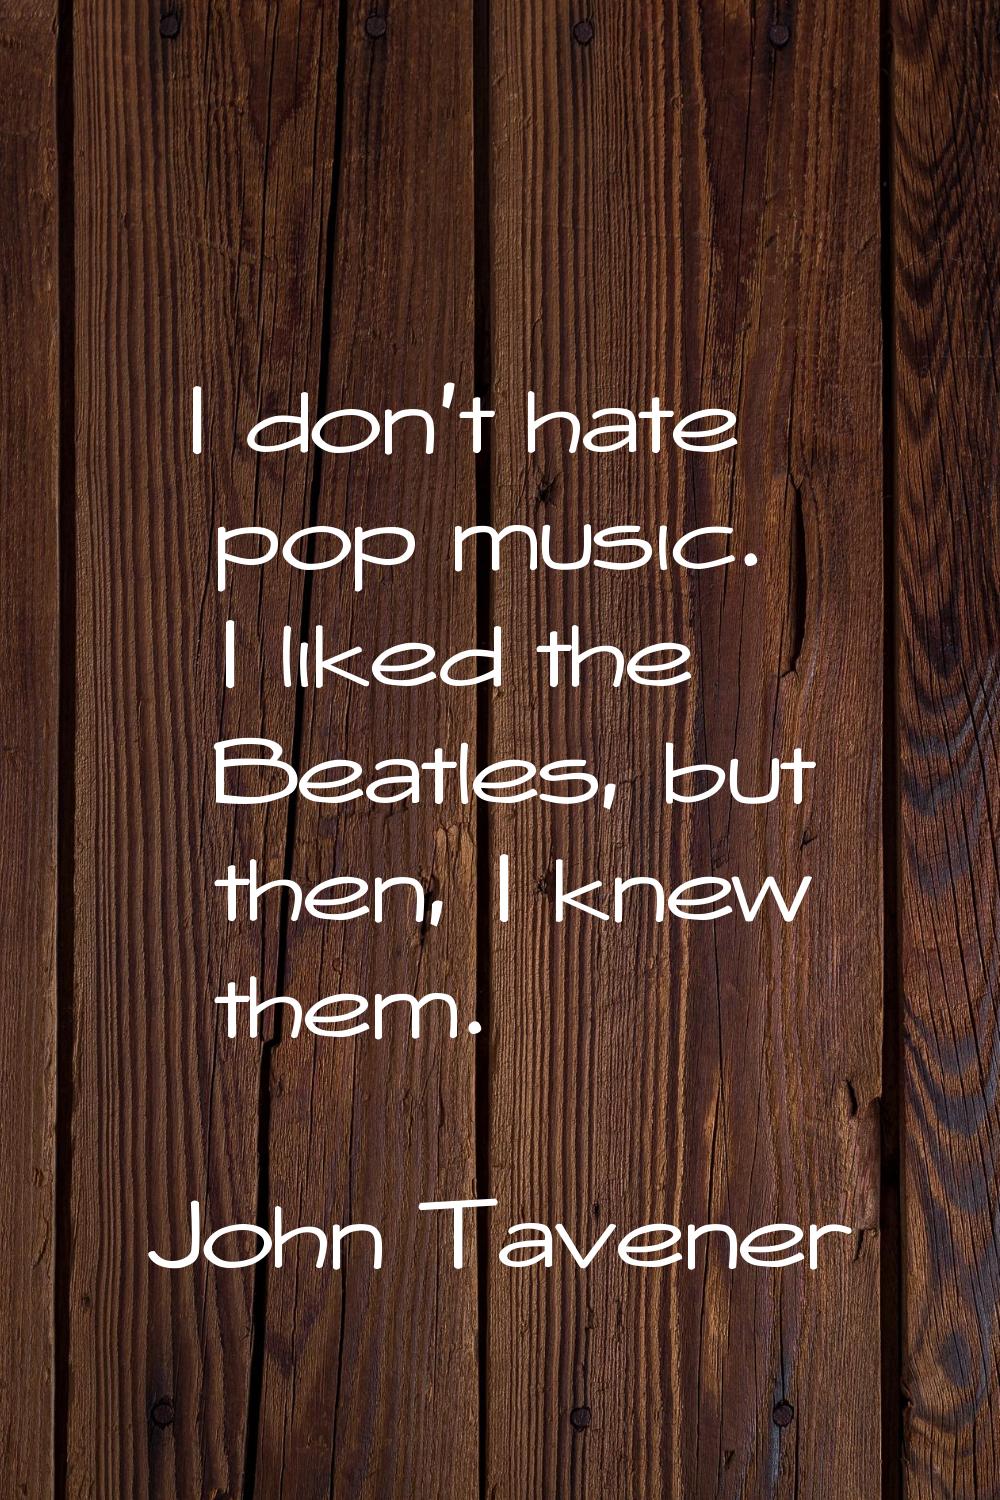 I don't hate pop music. I liked the Beatles, but then, I knew them.